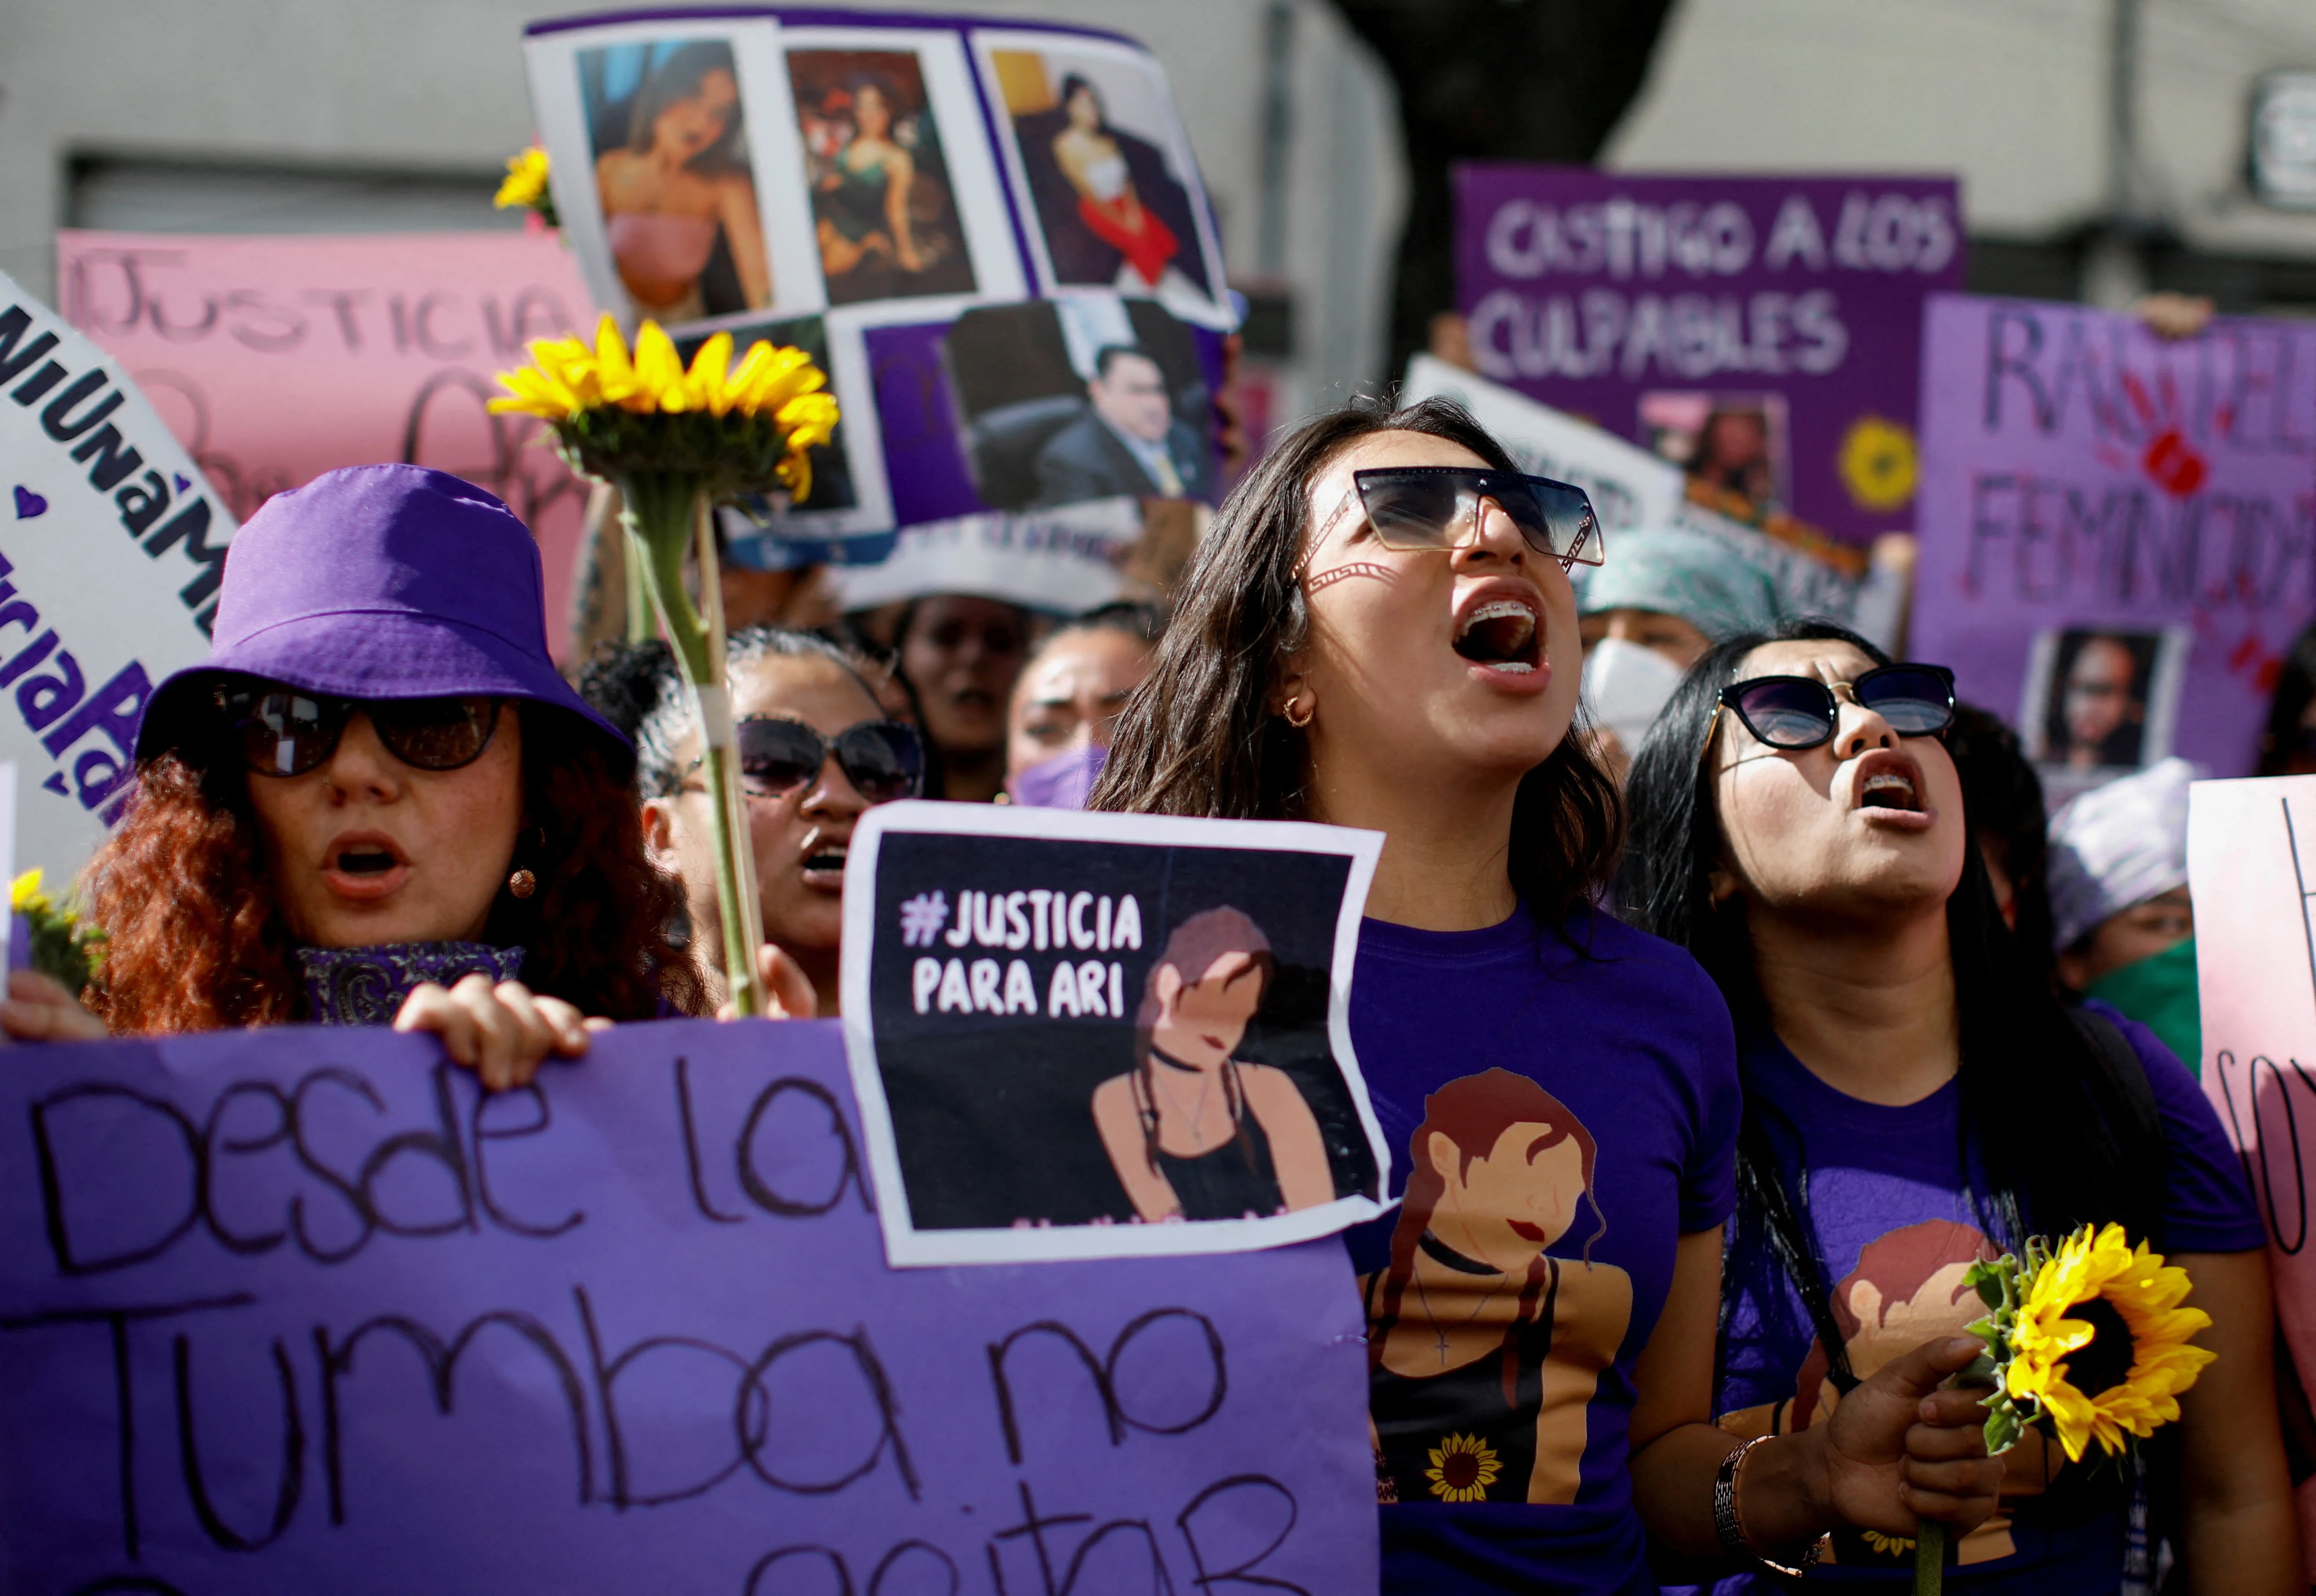 FILE PHOTO: People take part in a protest demanding justice after the death of Ariadna Fernanda Lopez, a 27-year-old woman who was found dead on a highway in Morelos state, in Mexico City, Mexico November 7, 2022. REUTERS/Raquel Cunha/File Photo